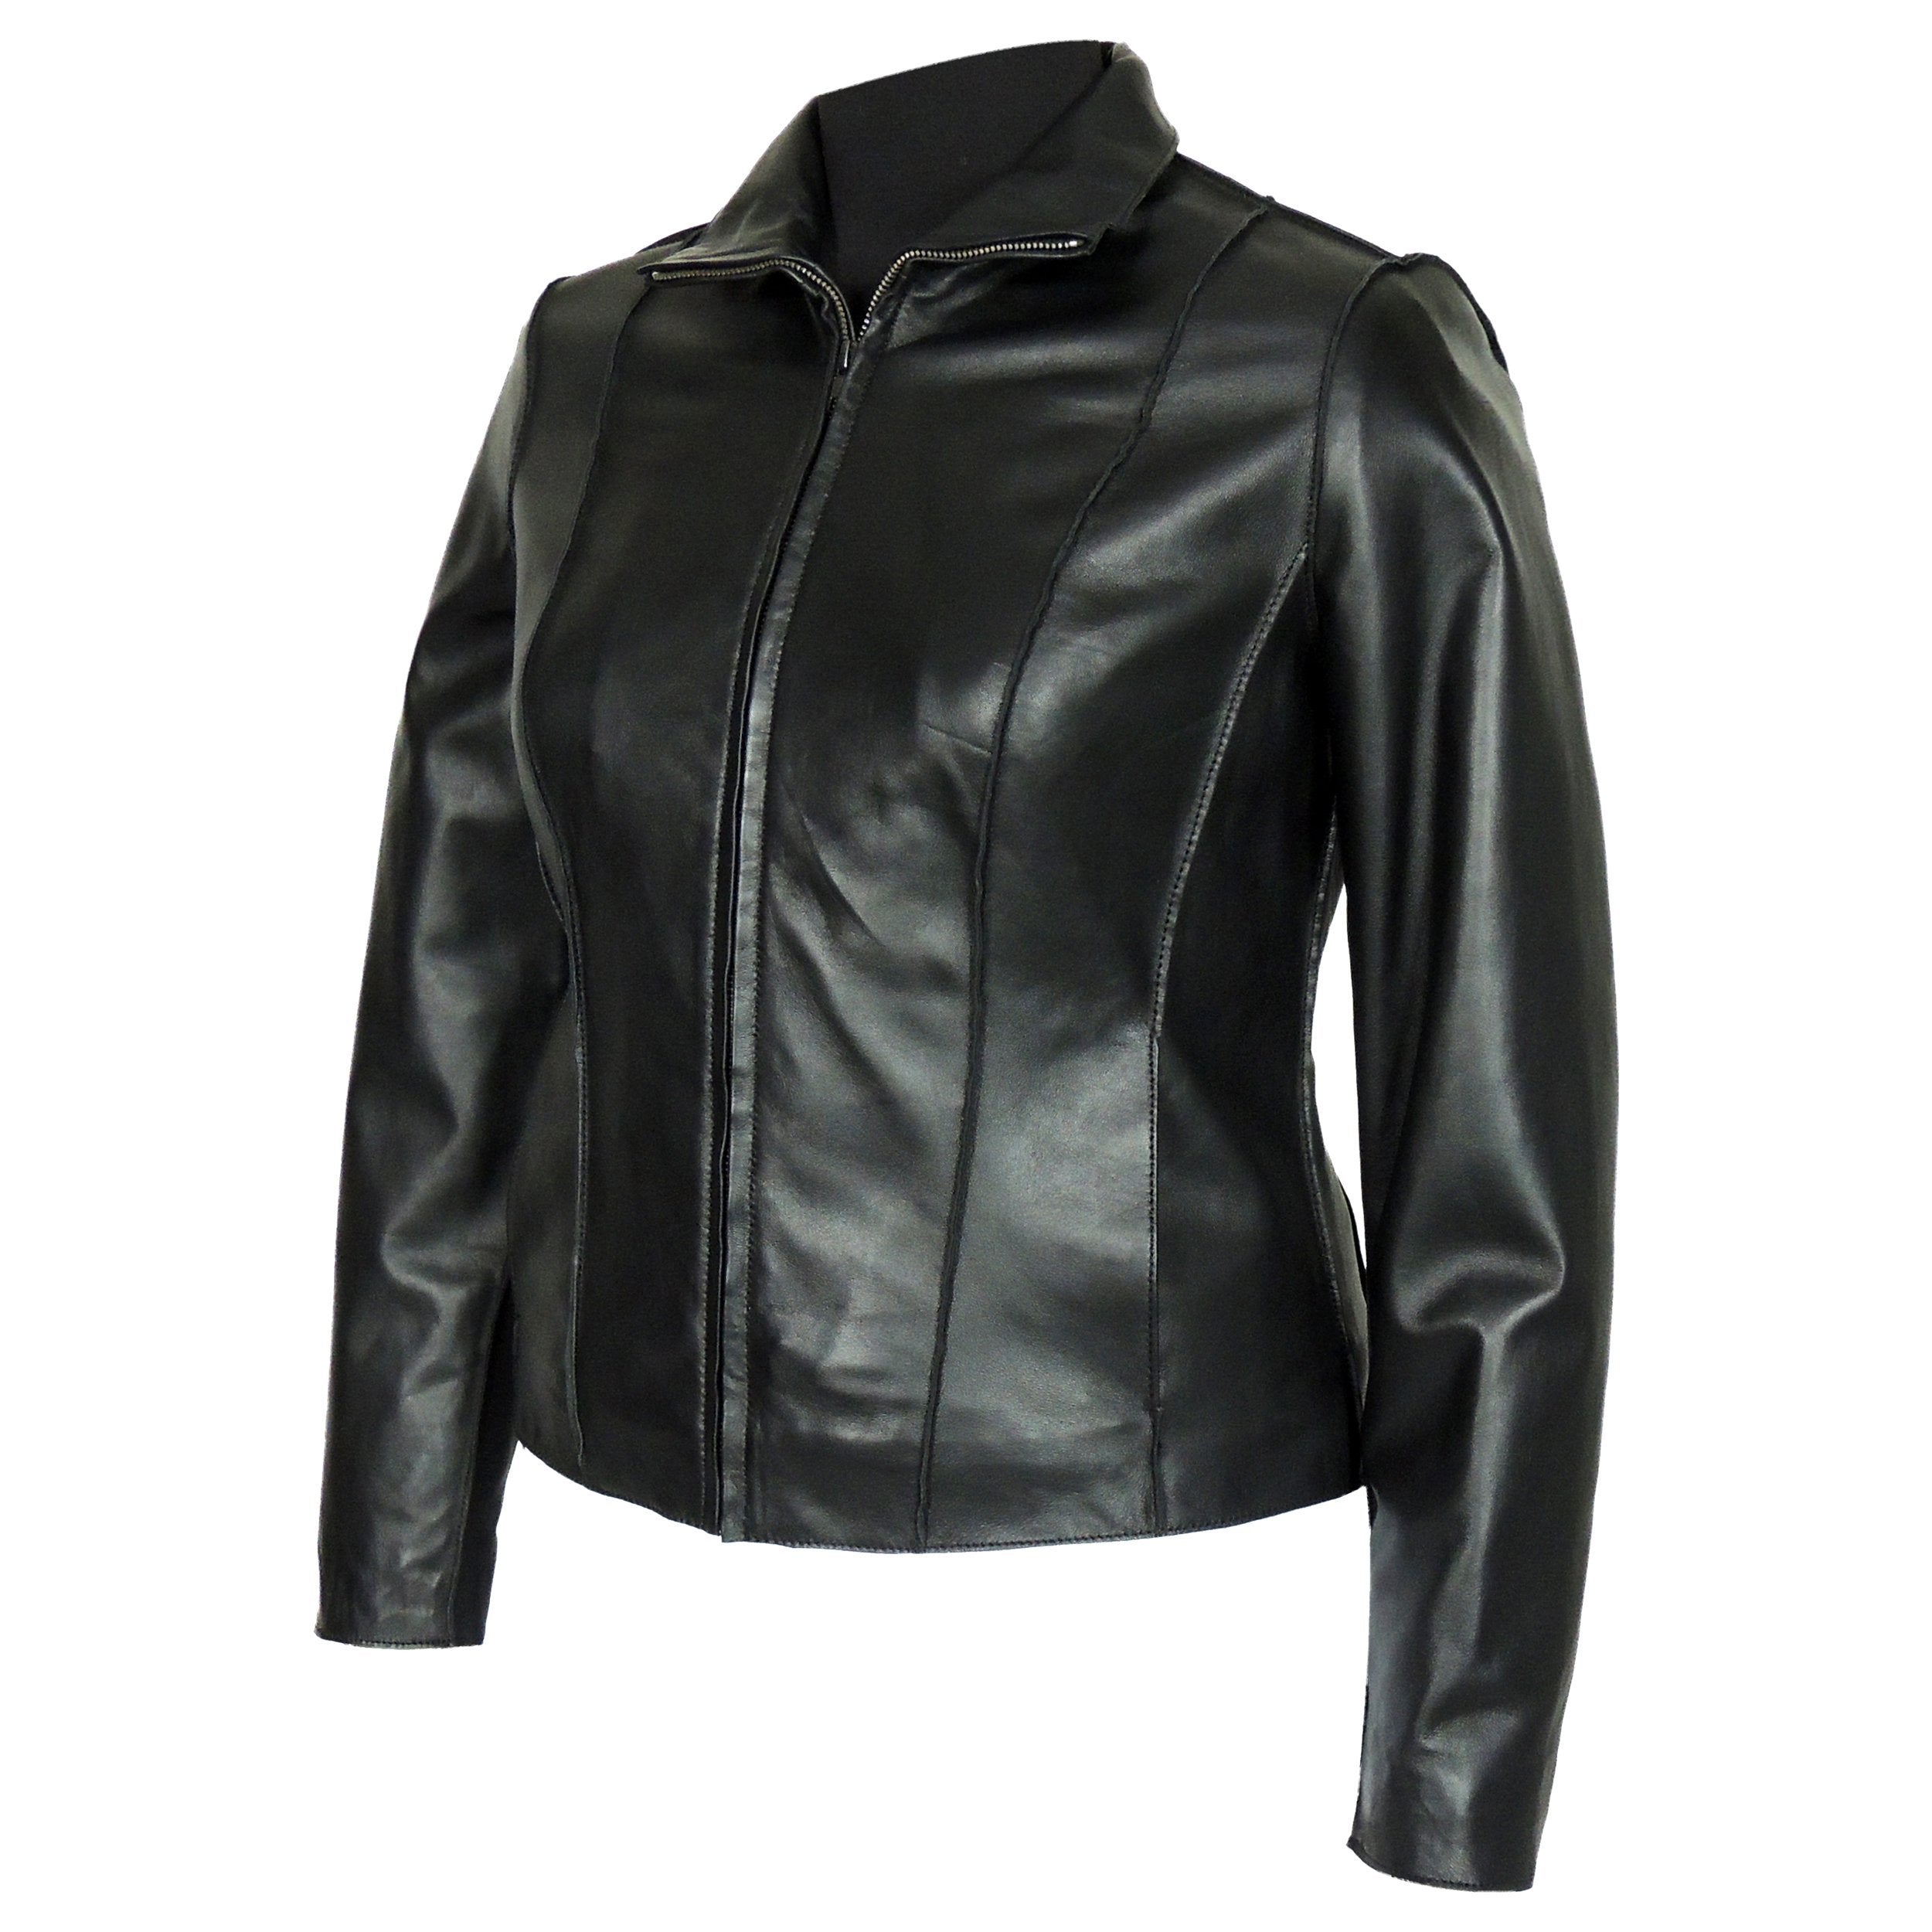 Picture of a Women's Professional Stunner Sheepskin Leather Jacket black front view.